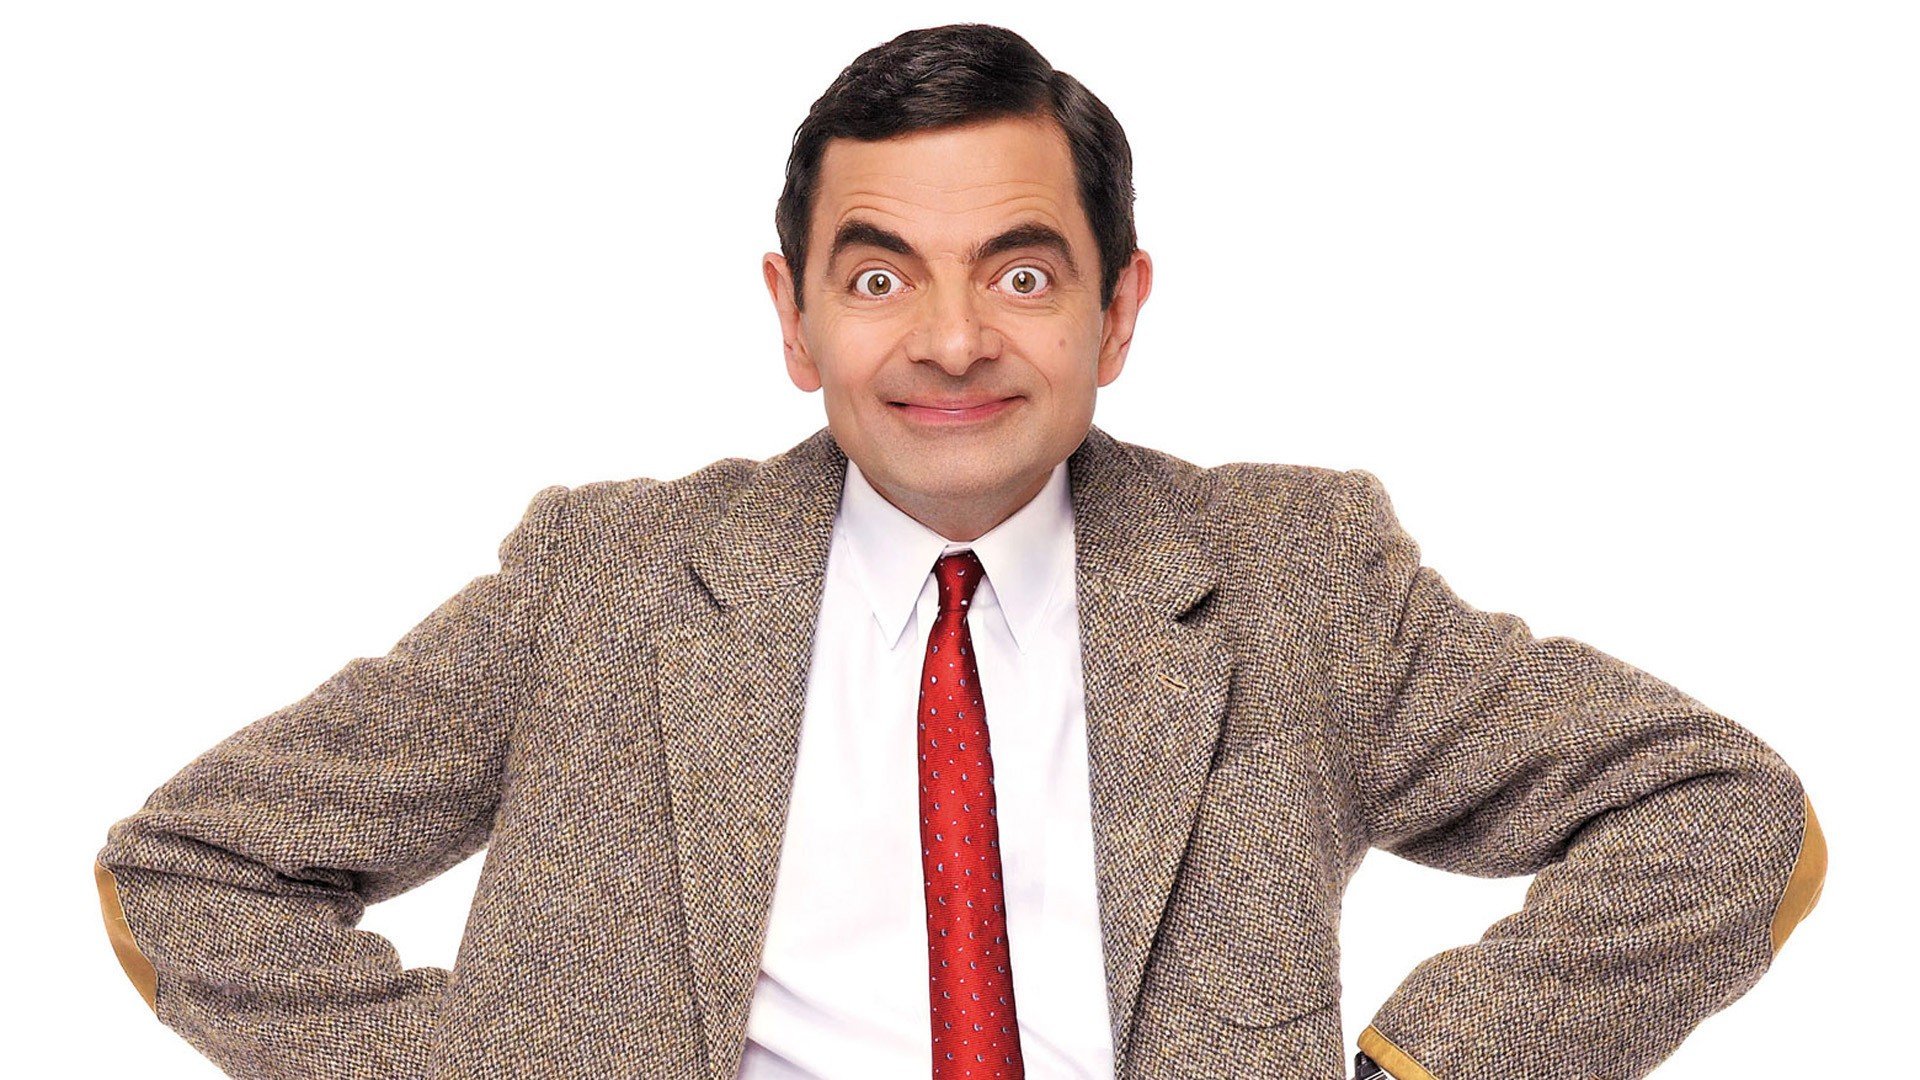 men, Actor, Rowan Atkinson, Mr. Bean, Smiling, Suits, Tie, White background  HD Wallpapers / Desktop and Mobile Images & Photos